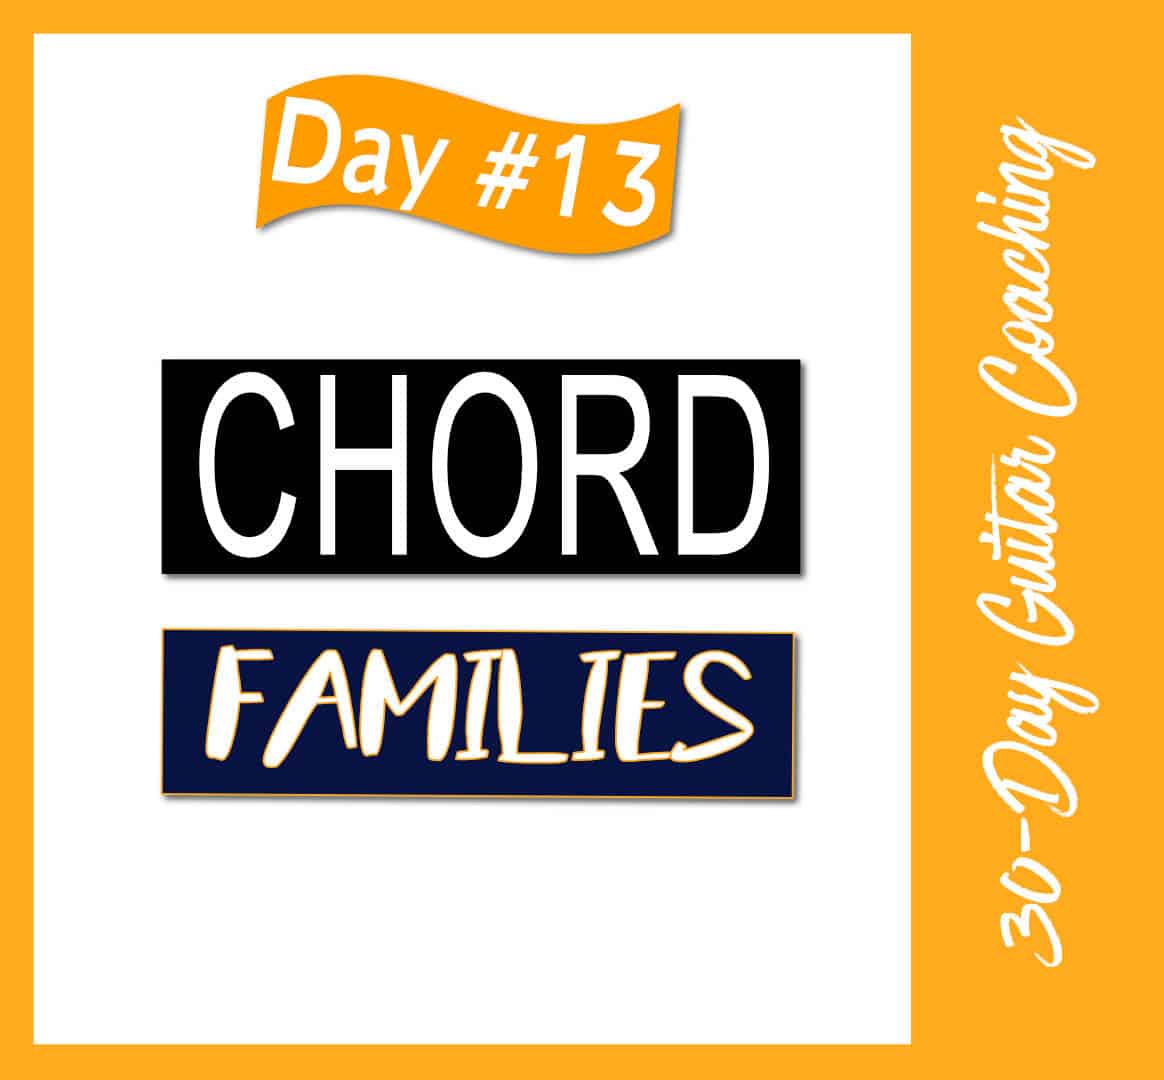 guitar-chord-families-day-13-real-guitar-lessons-by-tomas-michaud